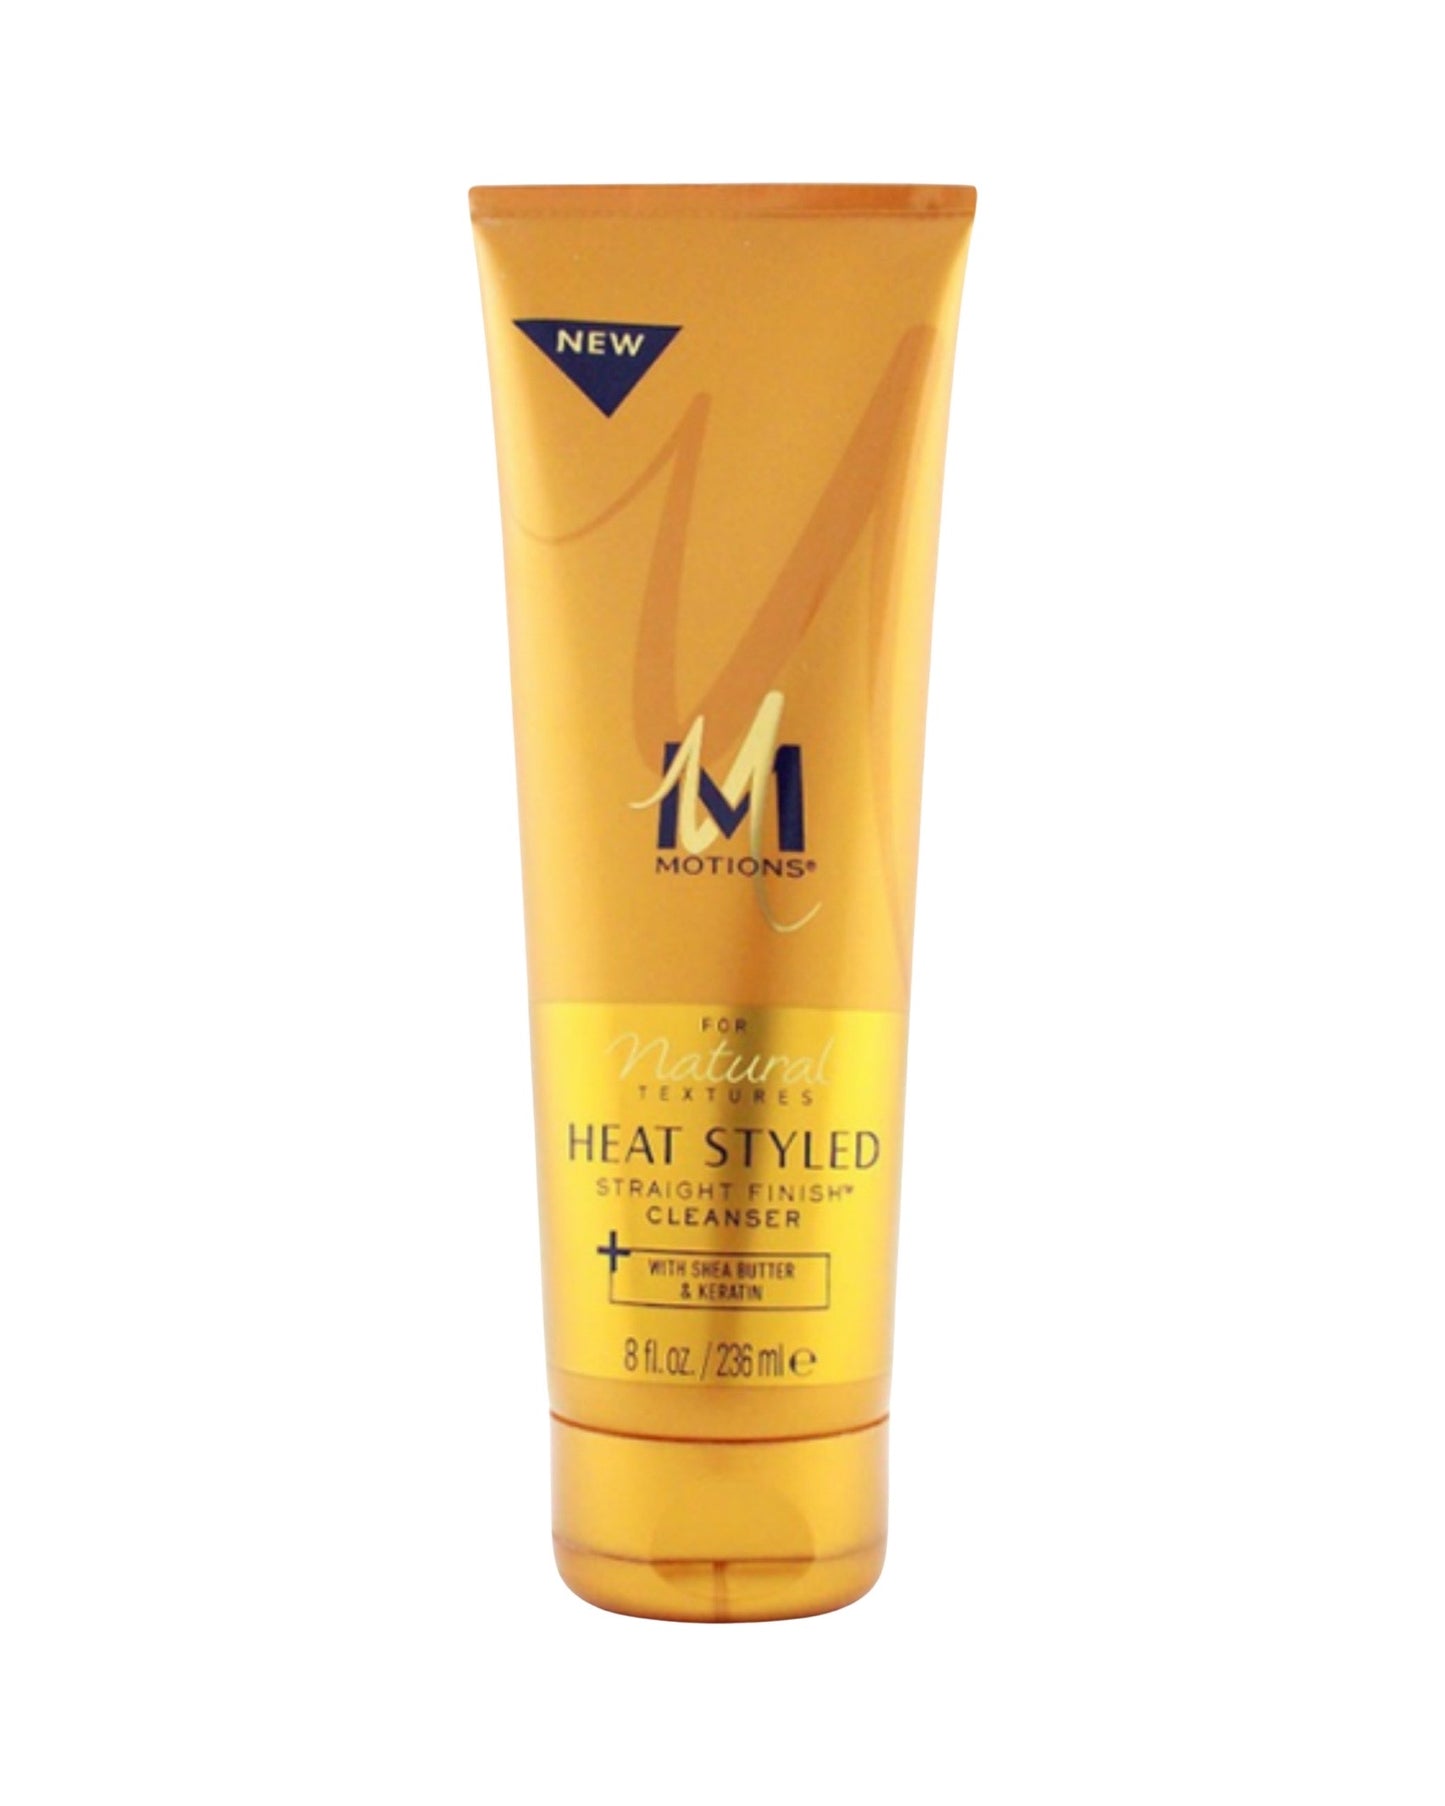 Motions For Natural Textures Heat Styled Straight Finish Cleanser - 8 Oz